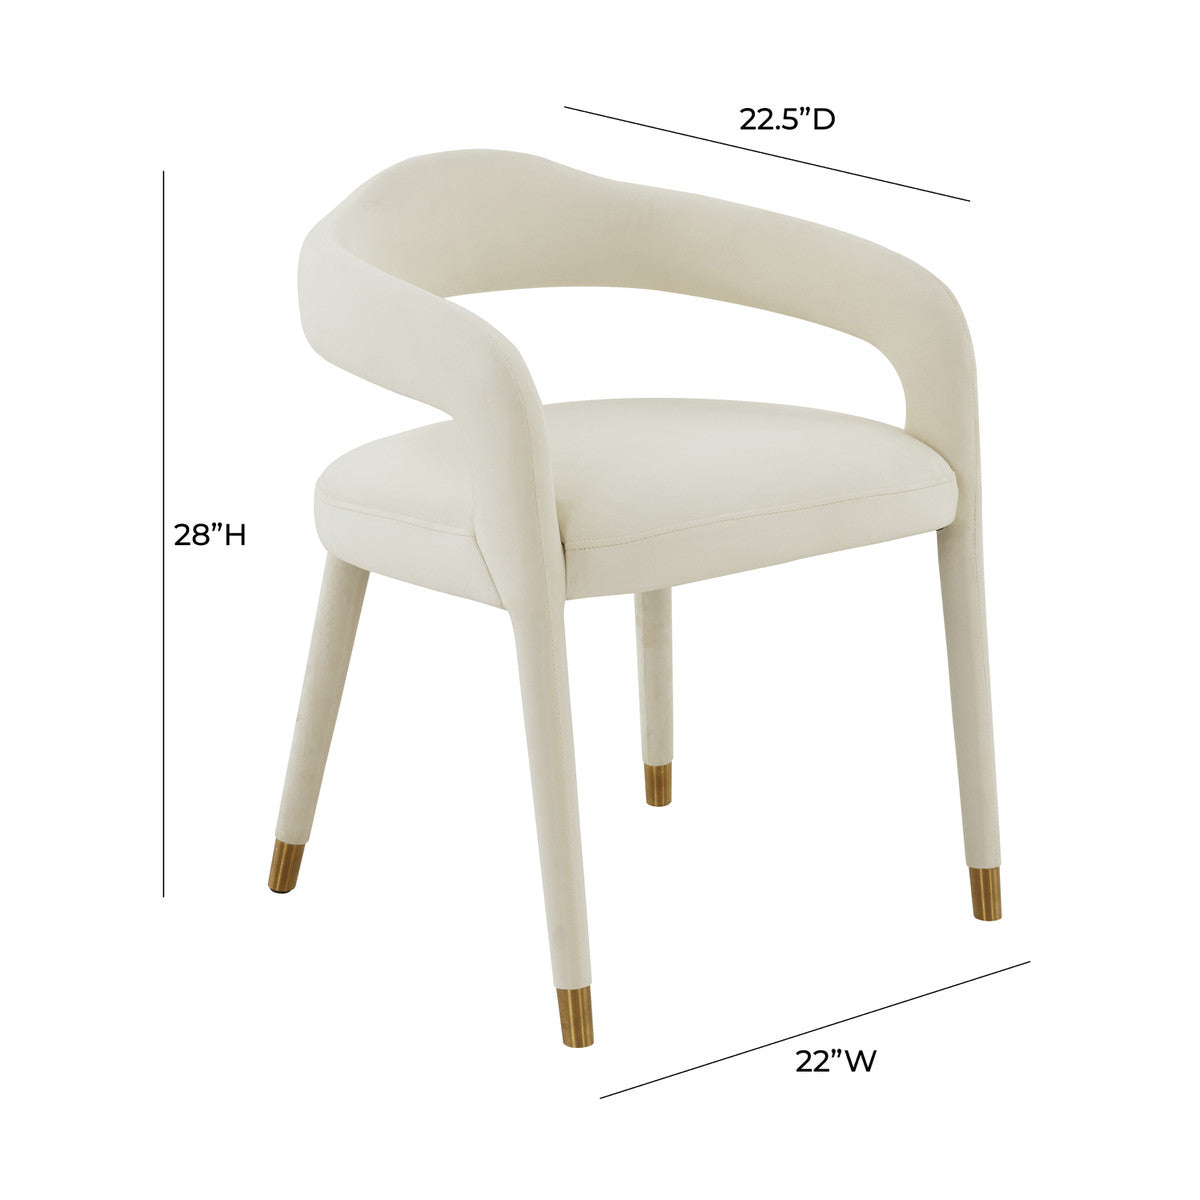 Bailey Cream Velvet Dining Chair - Luxury Living Collection